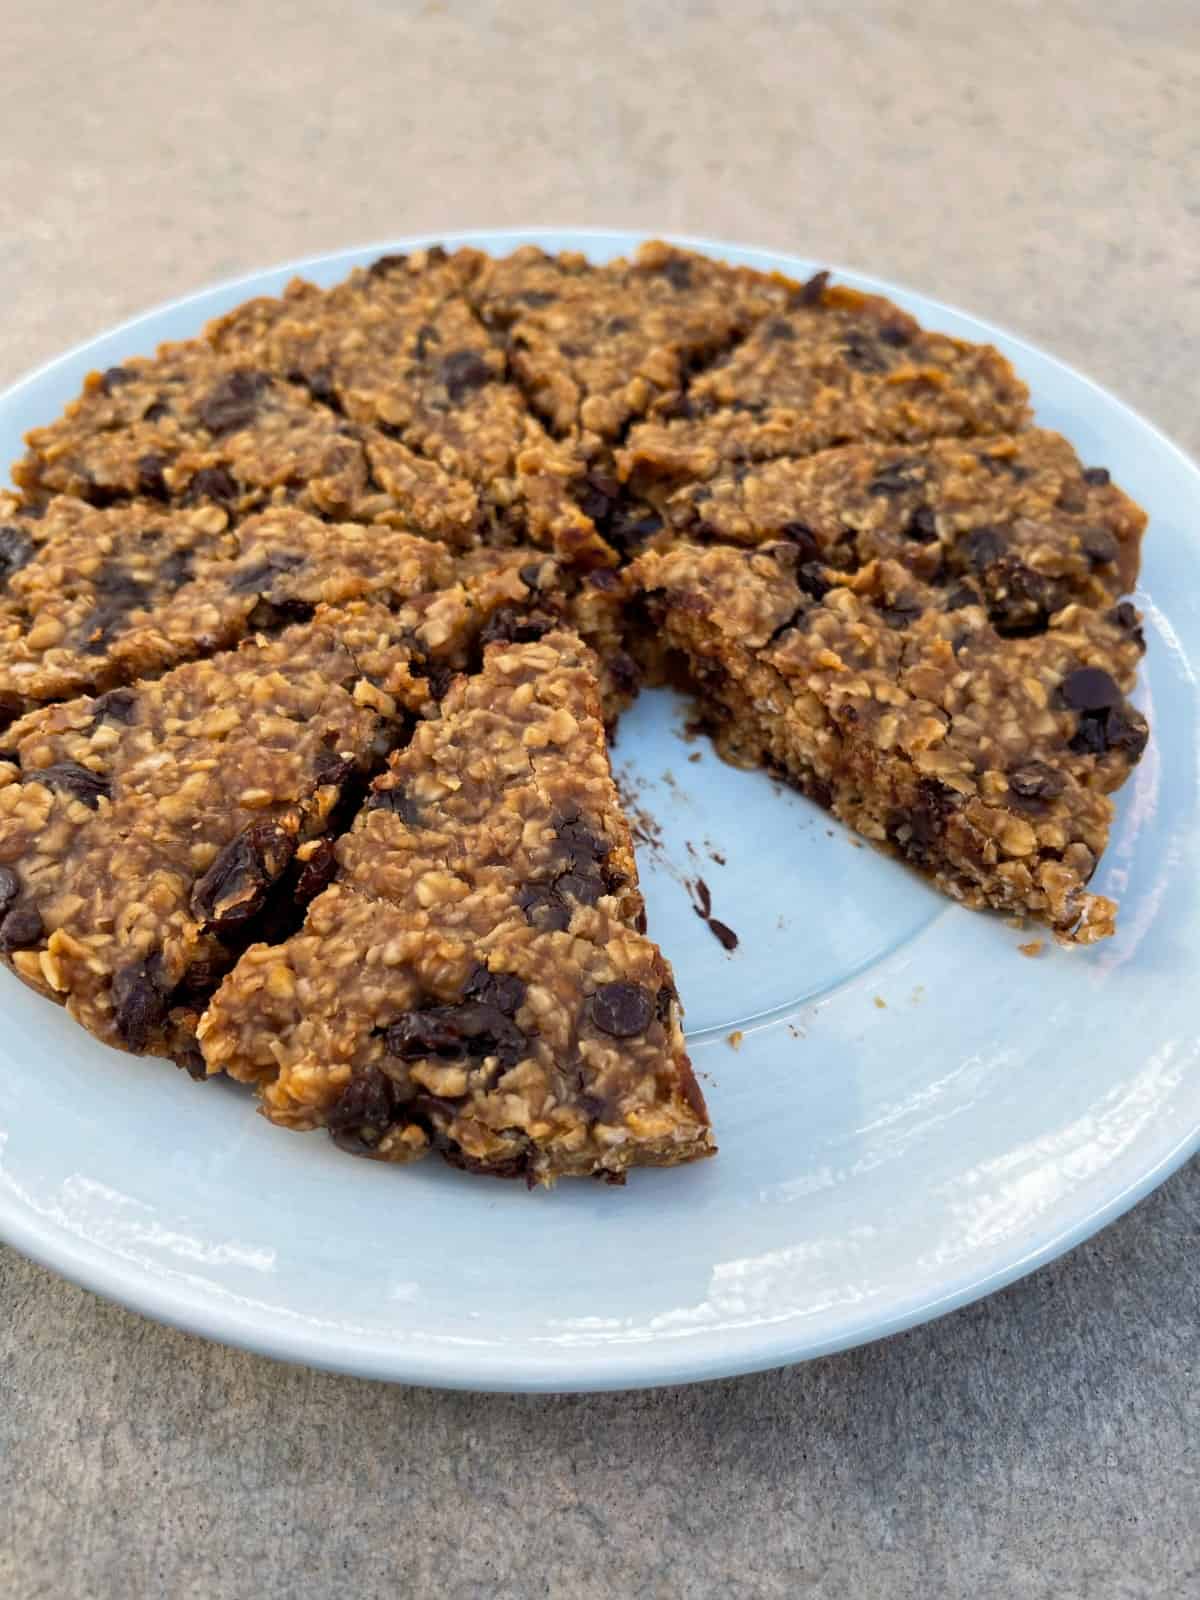 Chewy peanut butter raisin chocolate chip granola bars on serving plate.